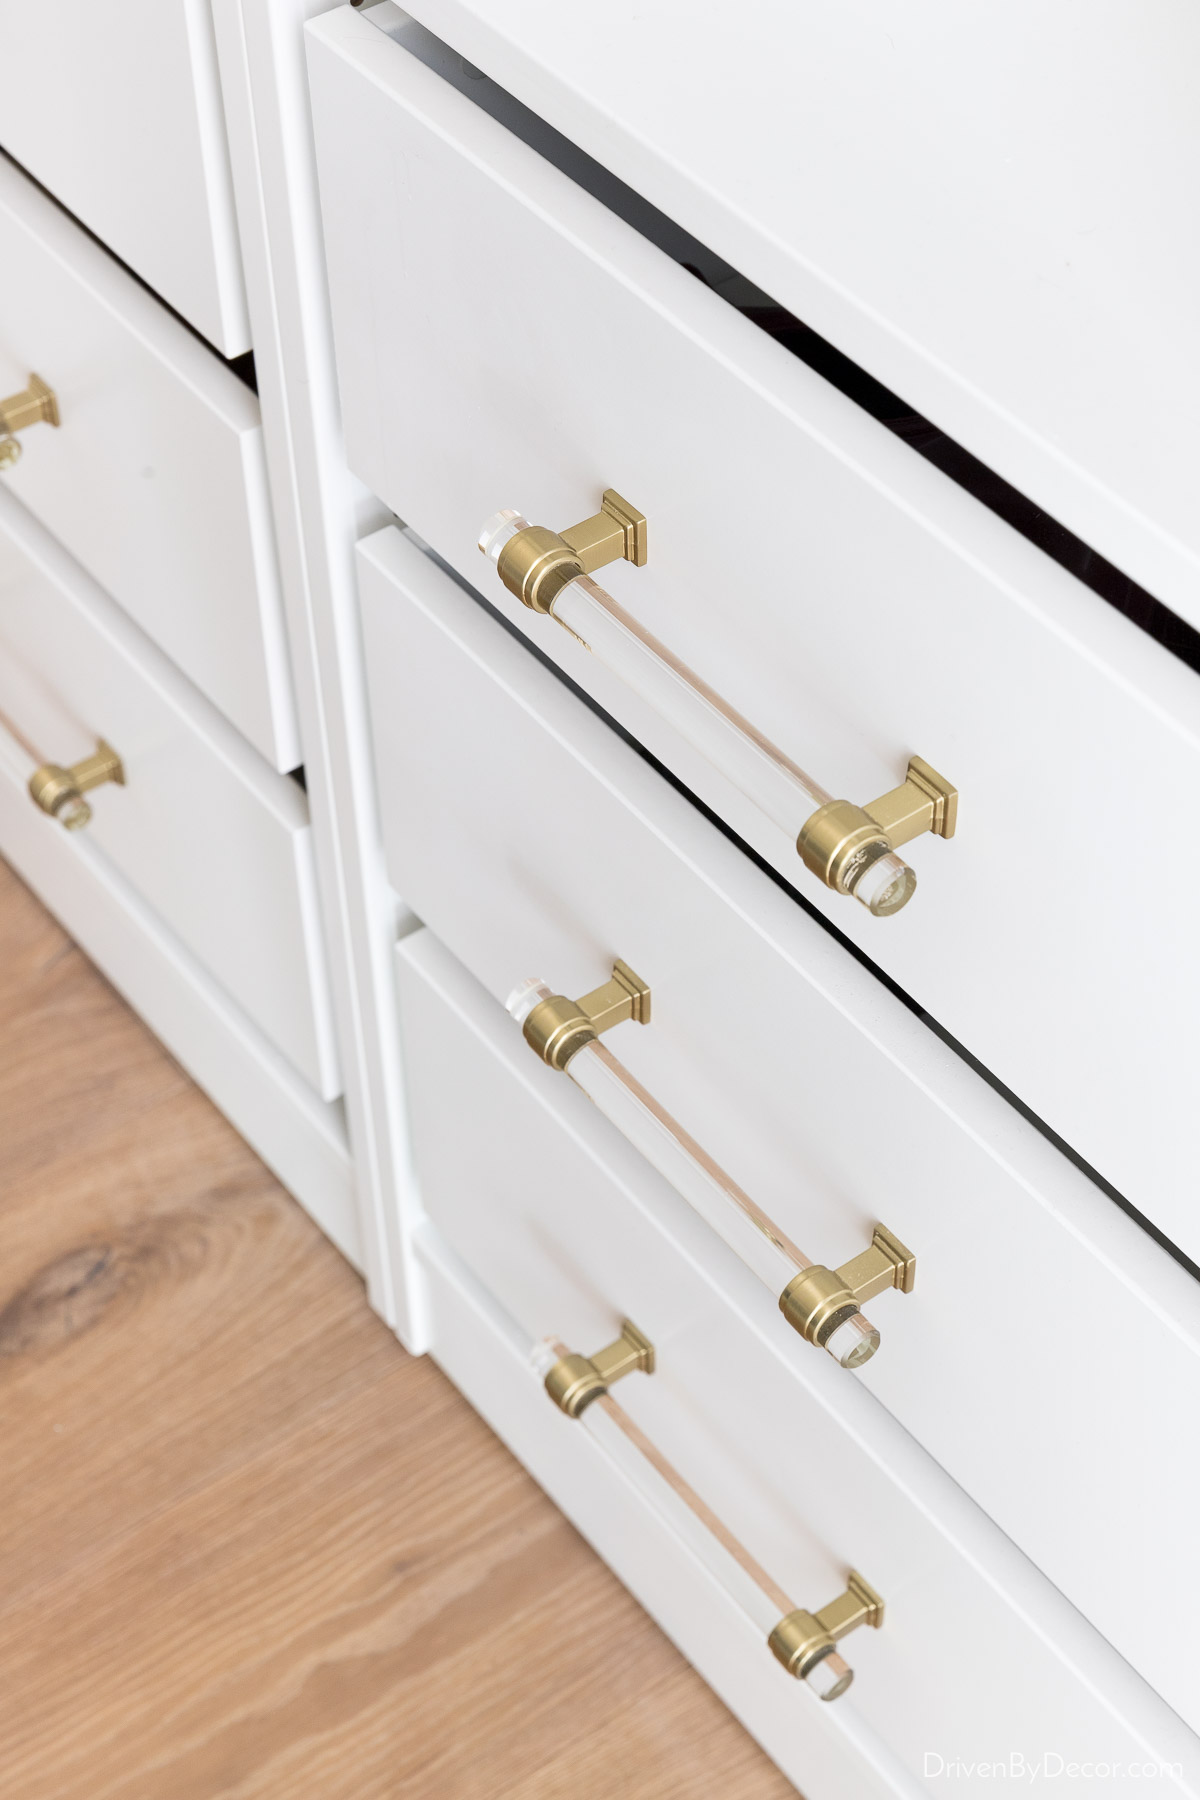 Acrylic pulls dress up these IKEA PAX drawer fronts